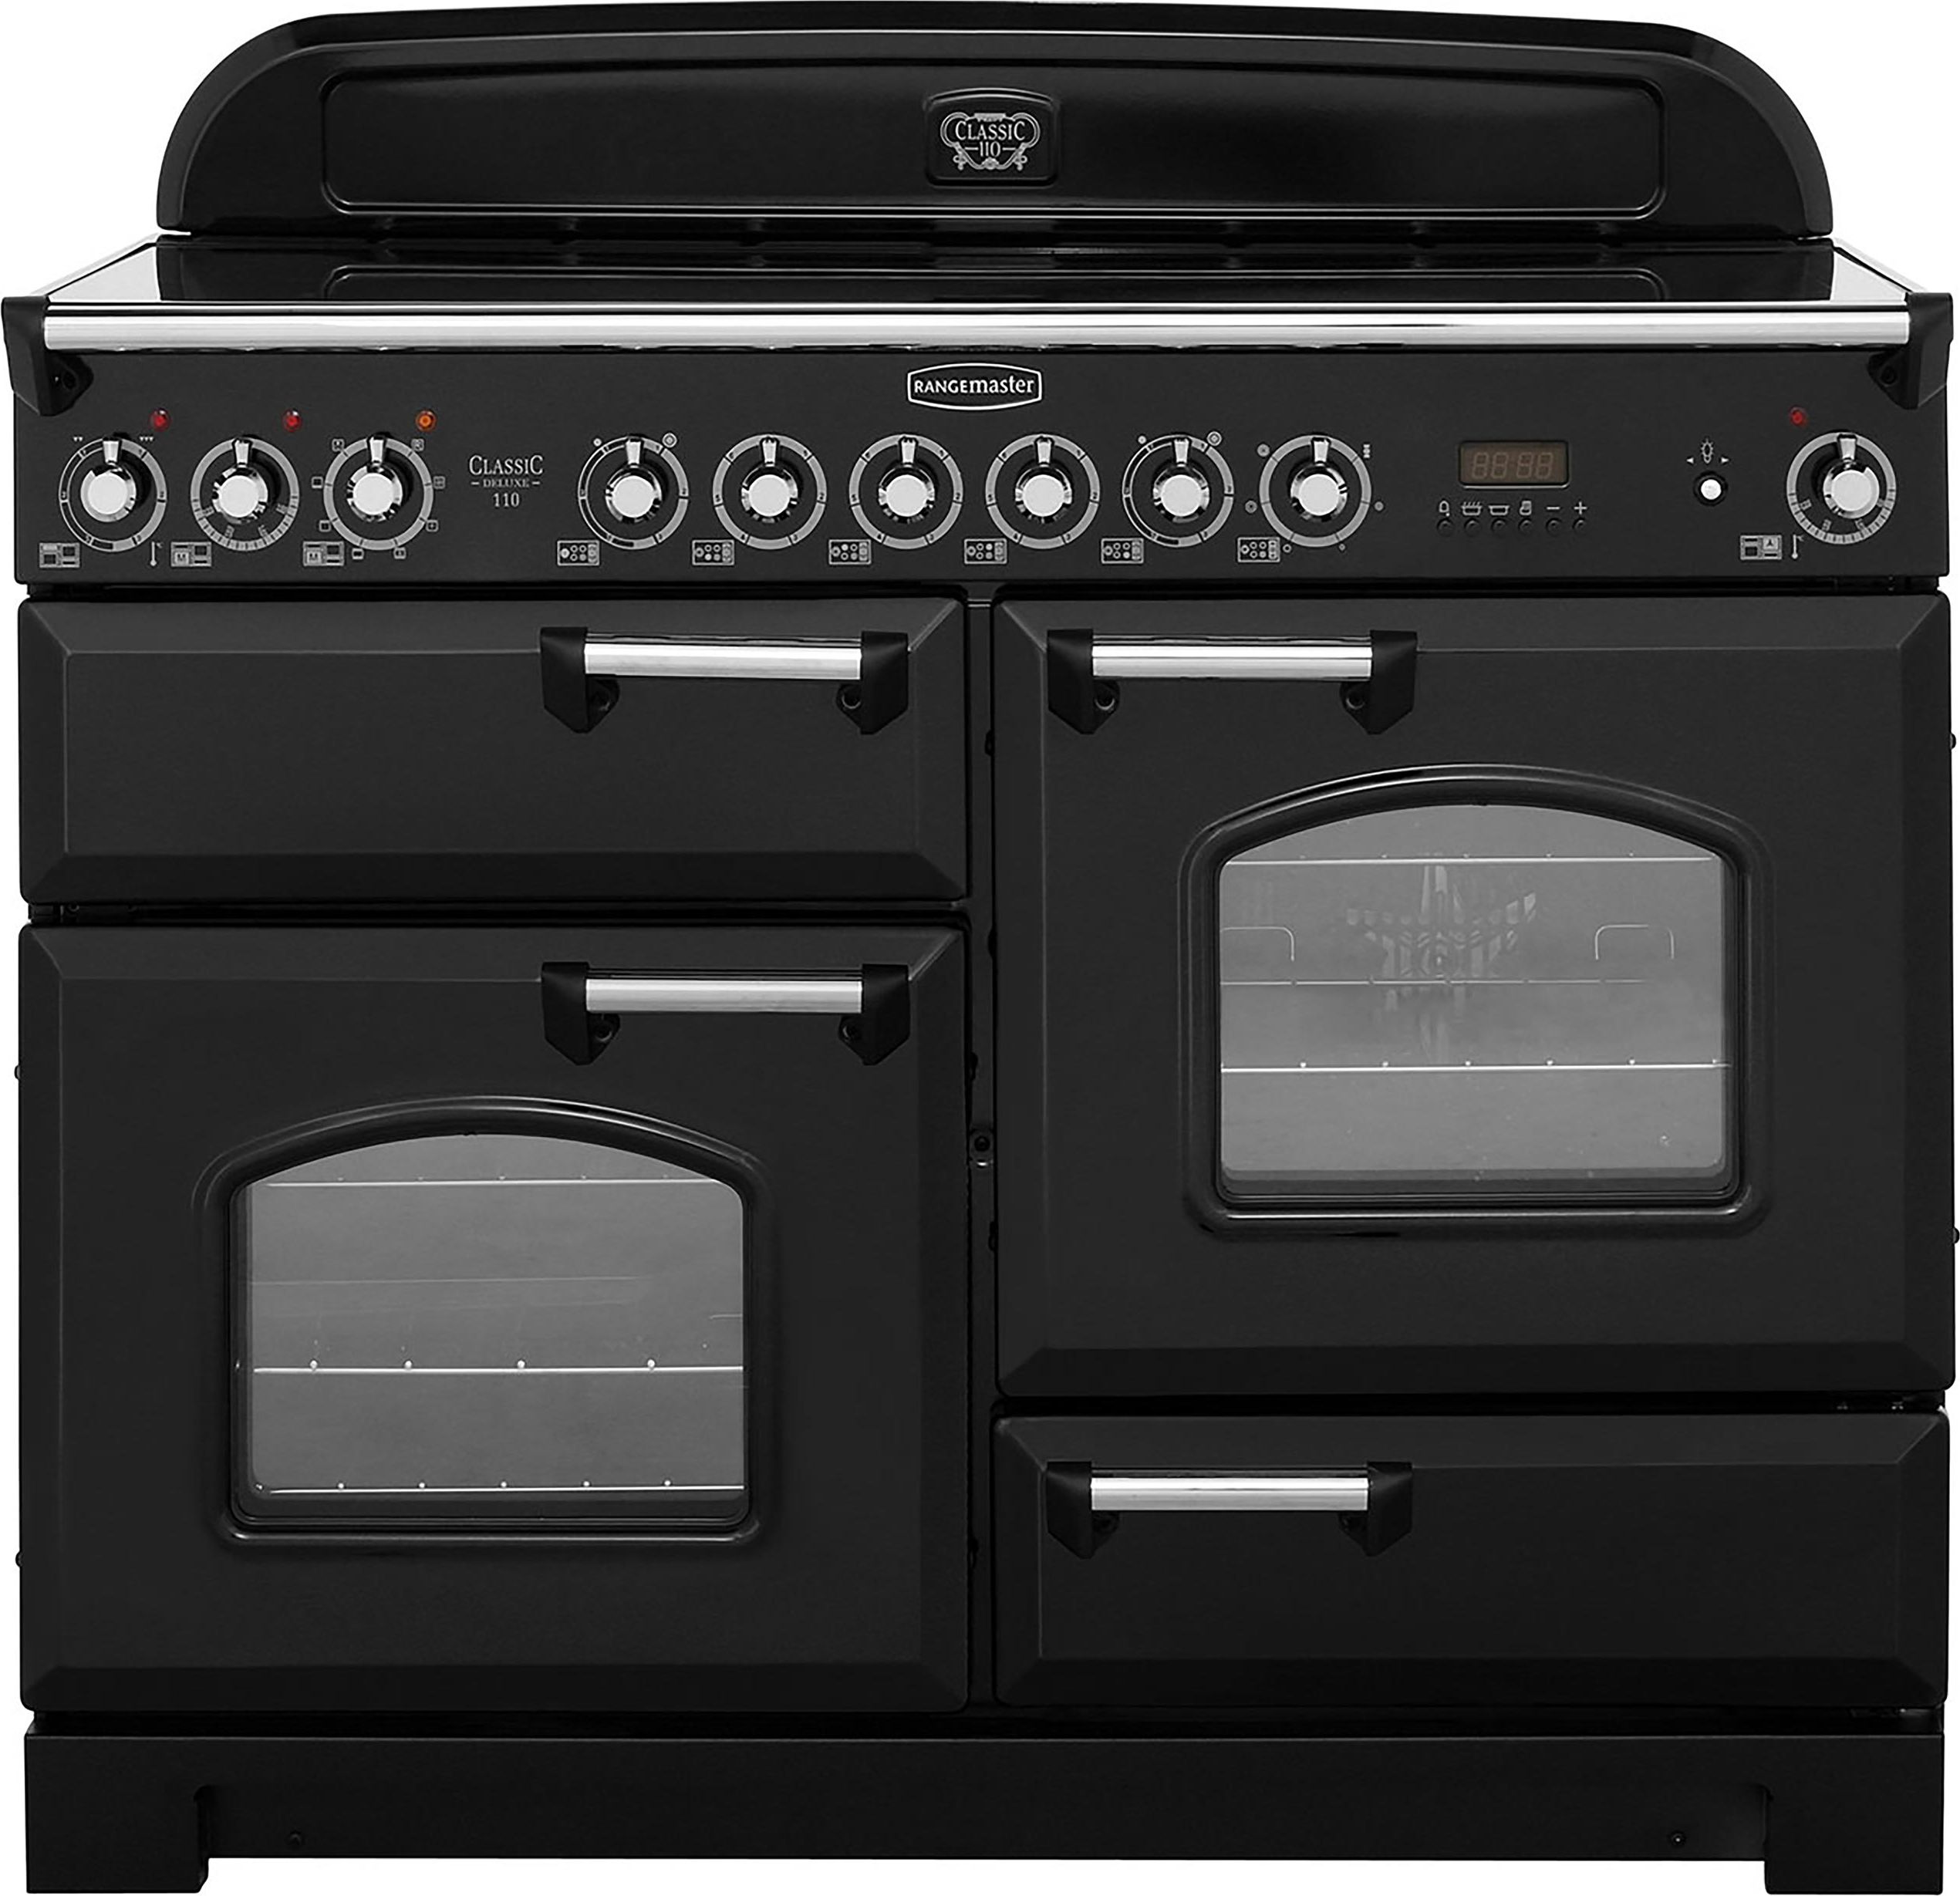 Rangemaster Classic Deluxe CDL110ECBL/C 110cm Electric Range Cooker with Ceramic Hob - Black / Chrome - A/A Rated, Black